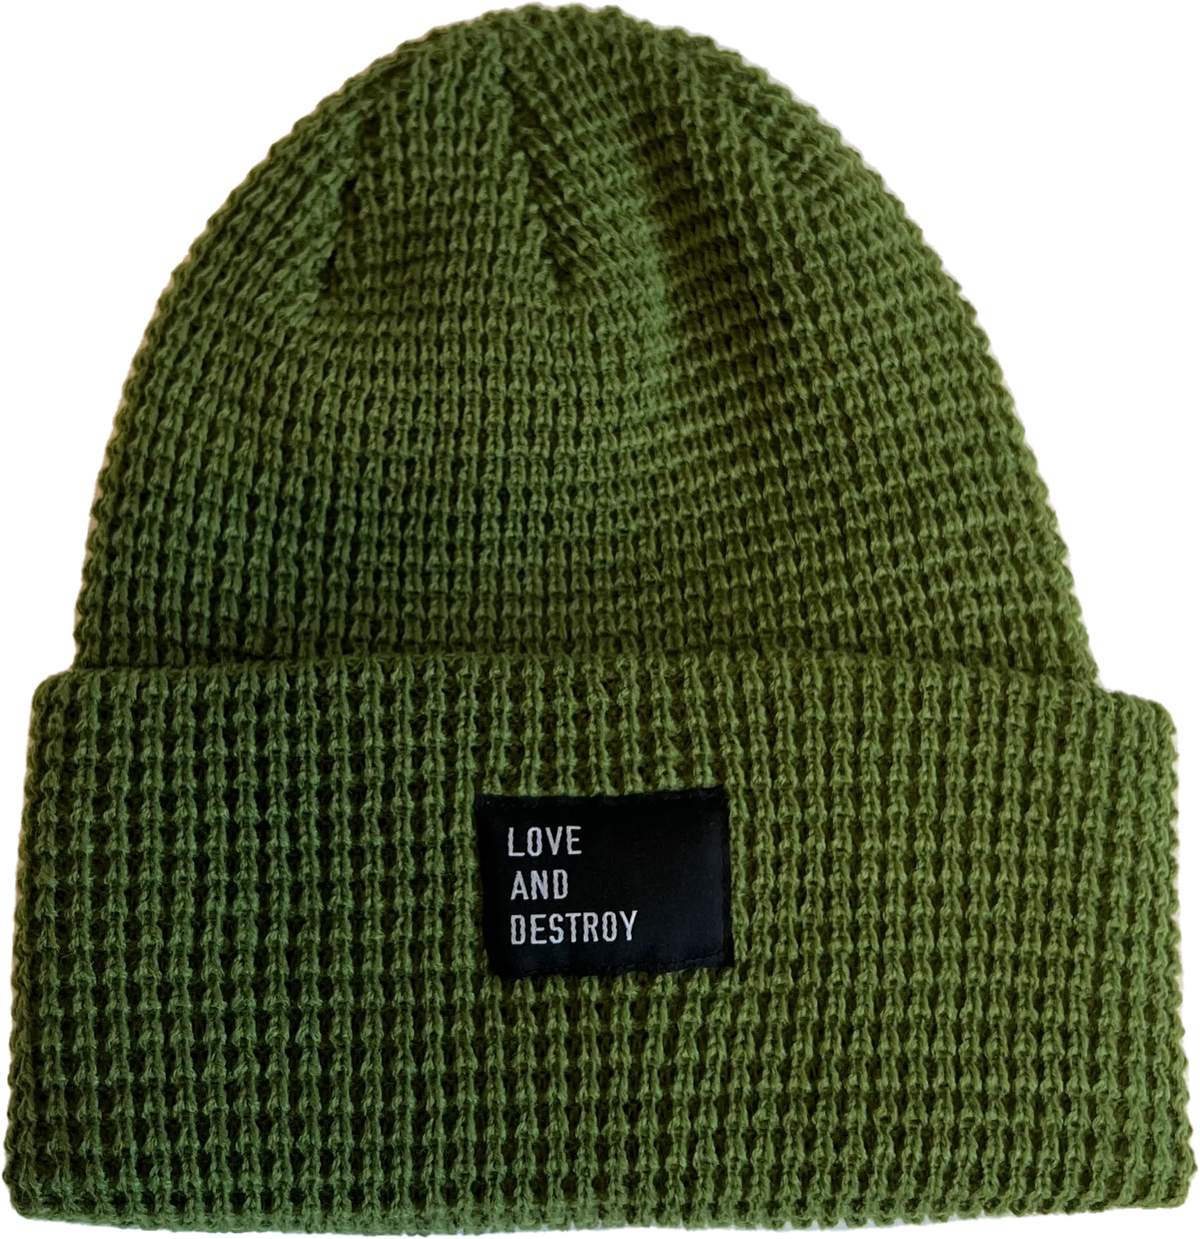 Love and Destroy Beanie